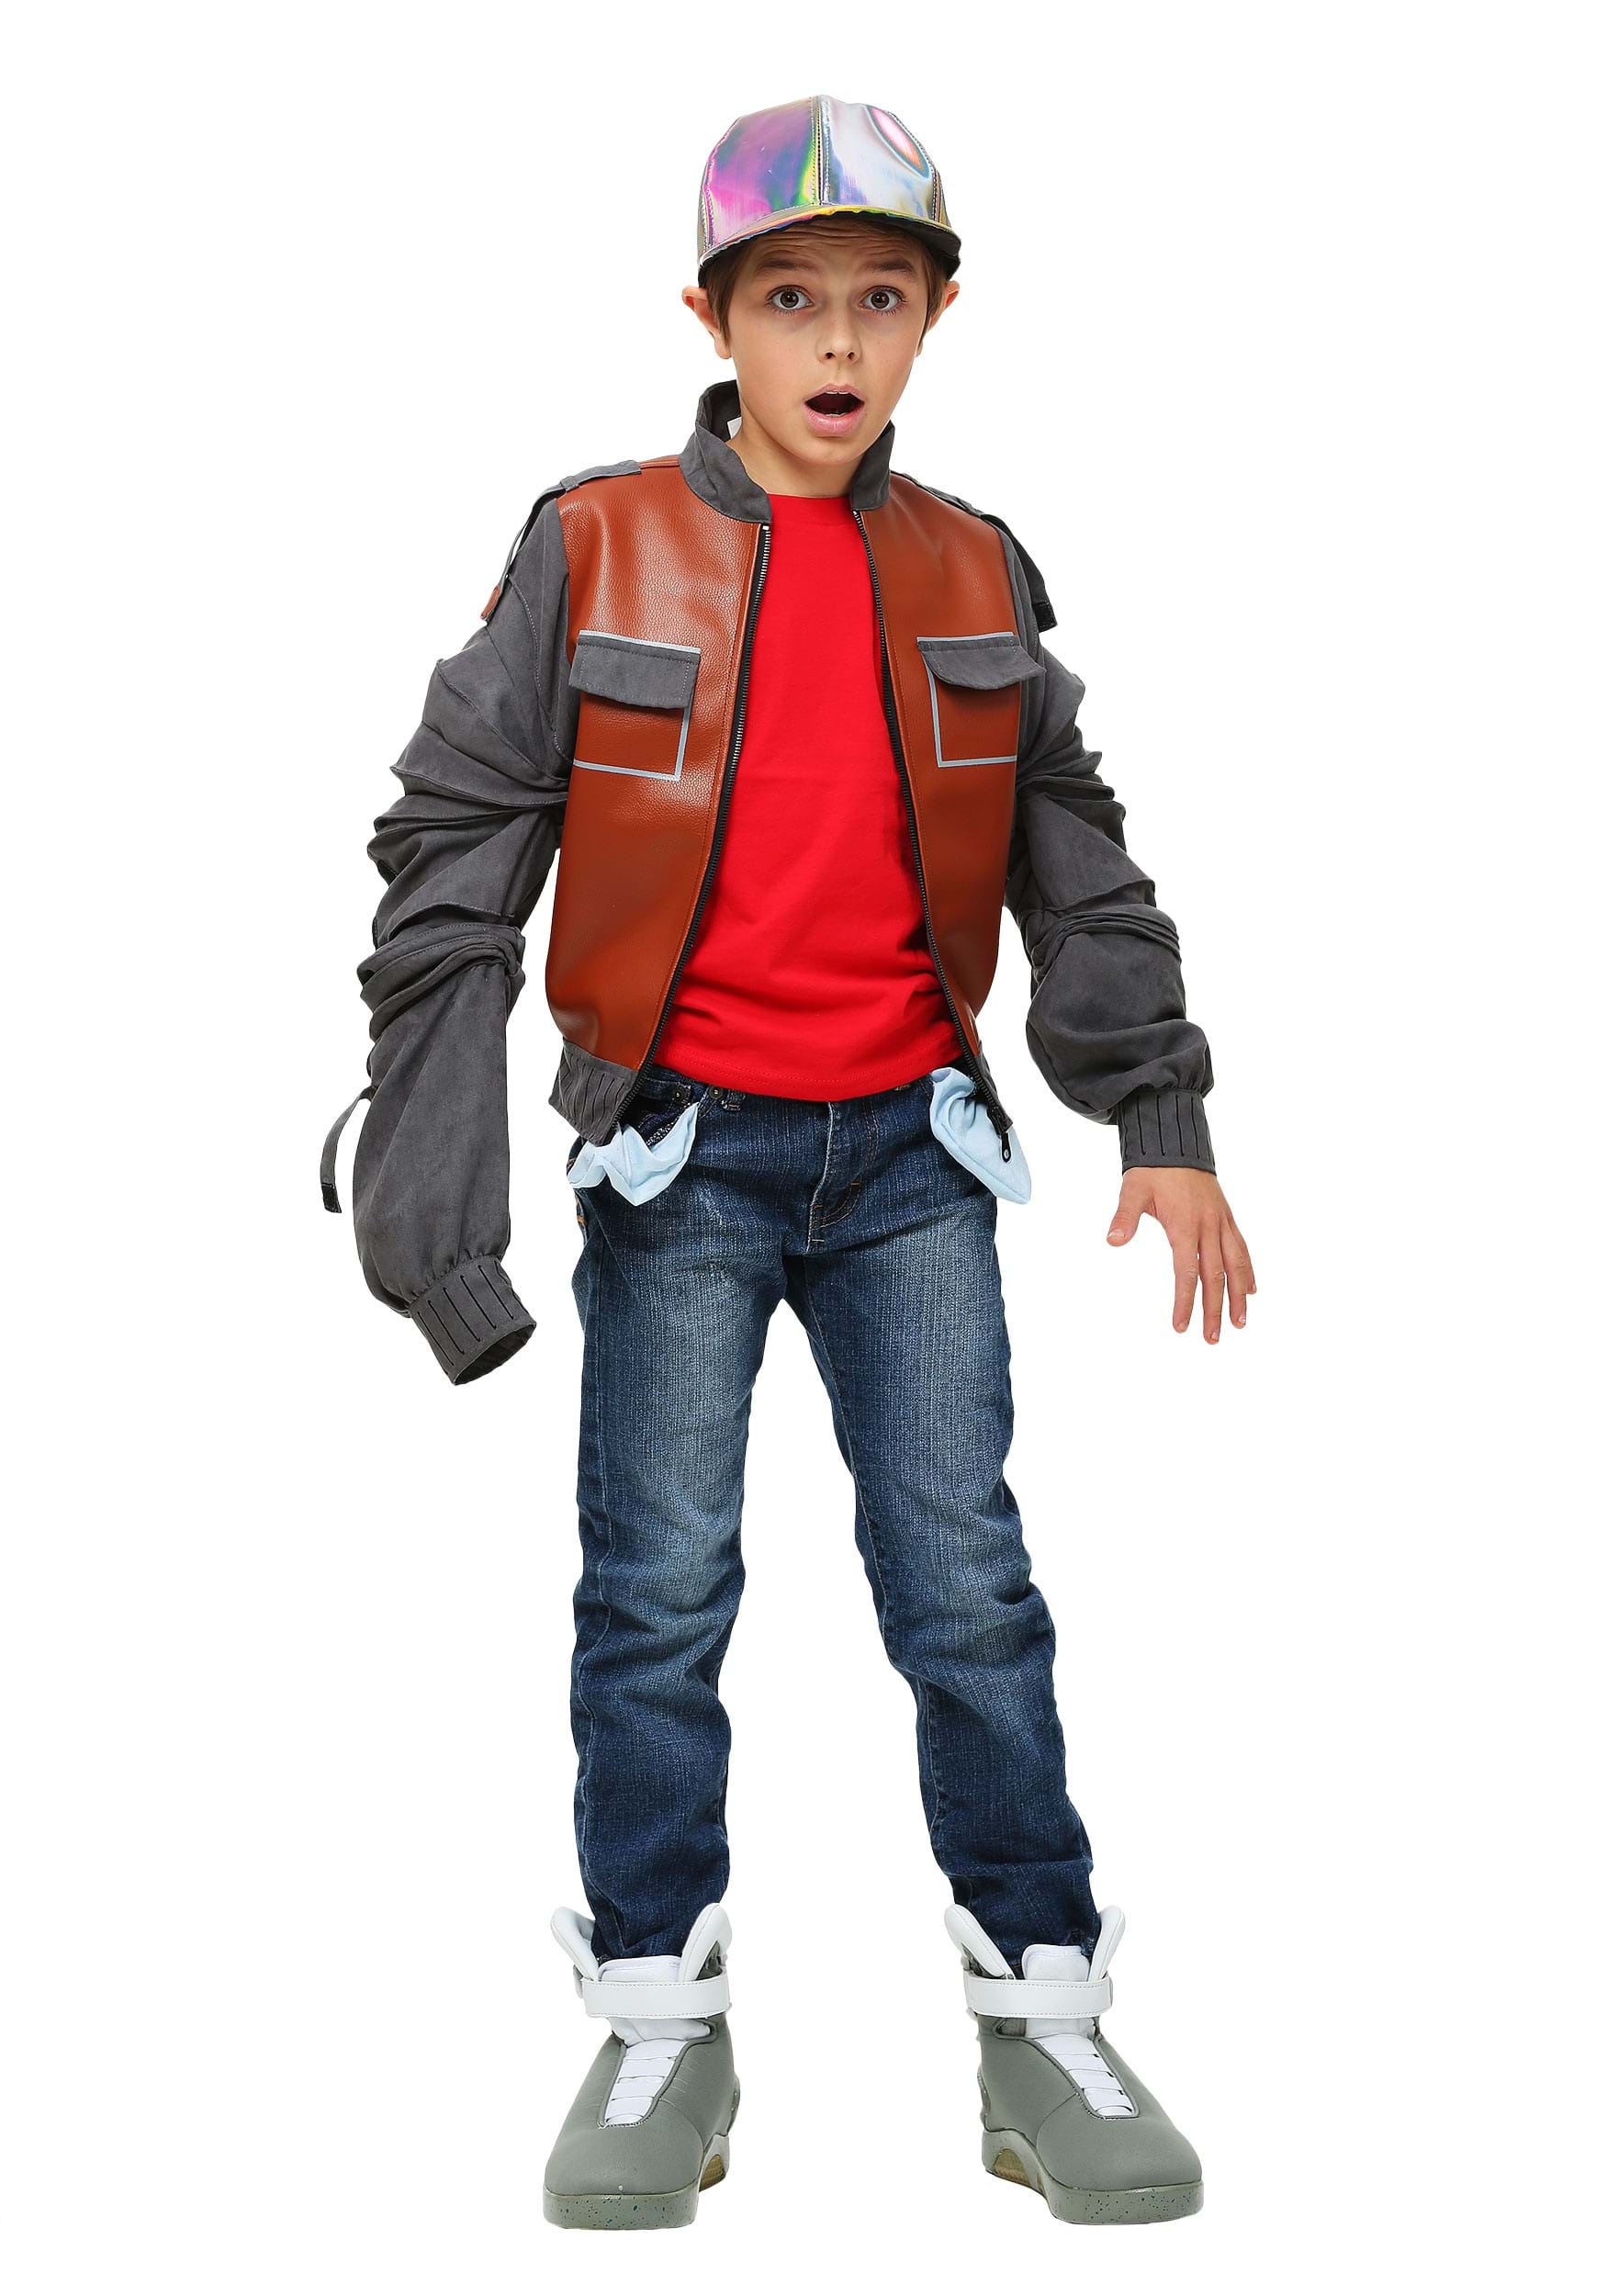 Marty McFly Costume Jacket for Kids from Back to the Future 2